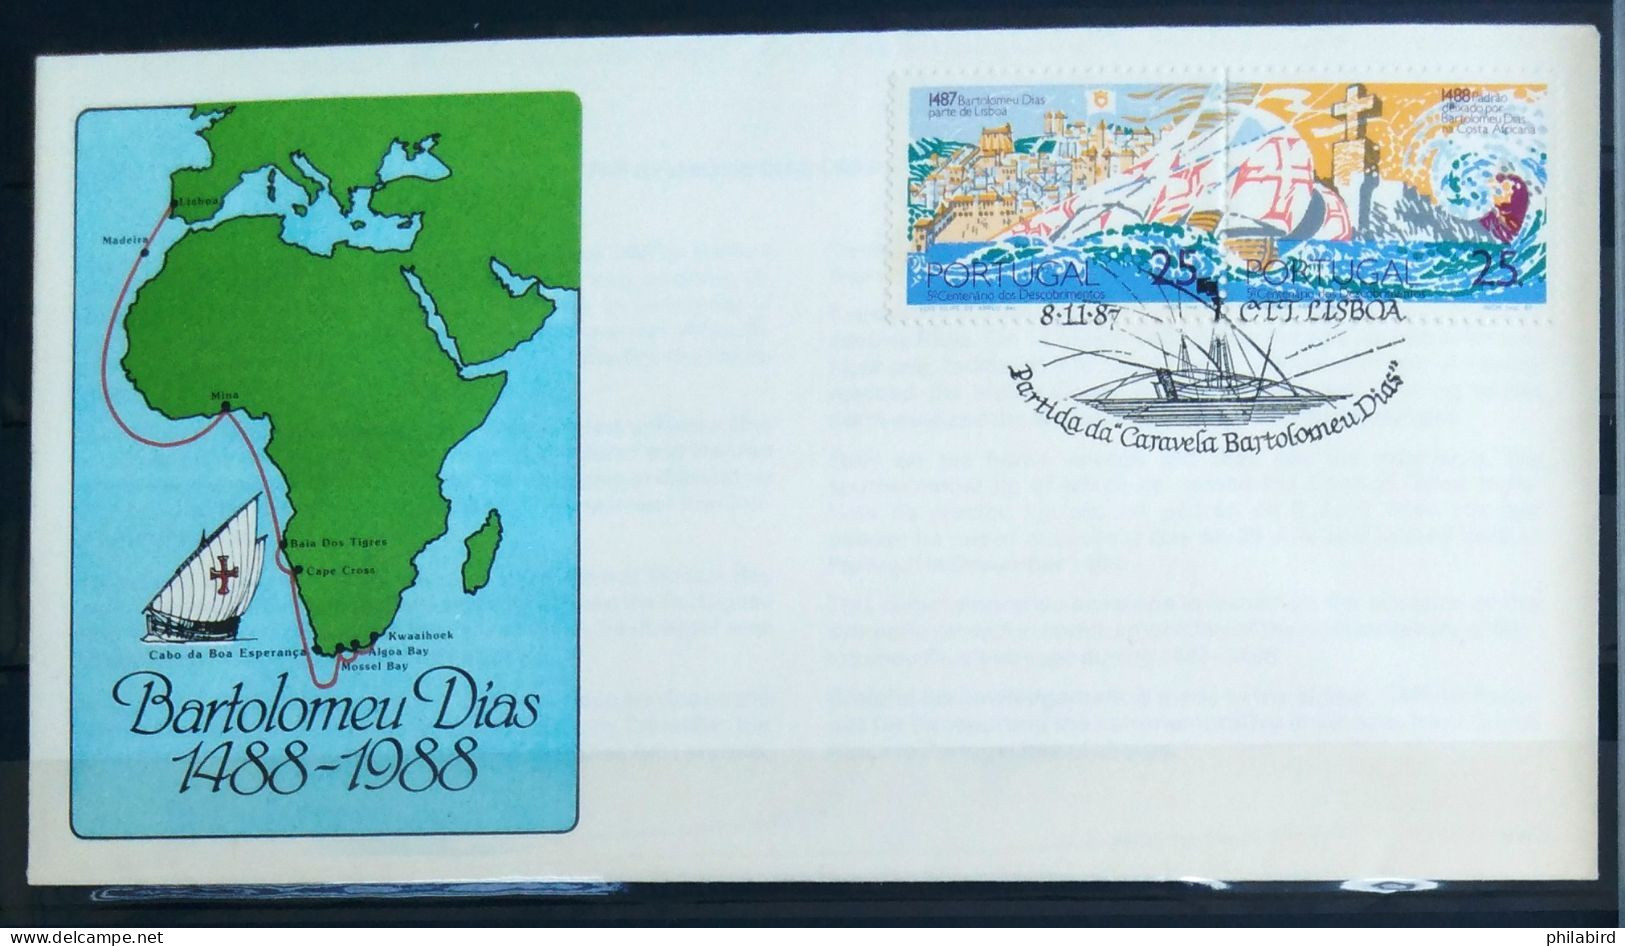 PORTUGAL                       N° 1705/1706                          1° JOUR                  08/11/1987 - FDC